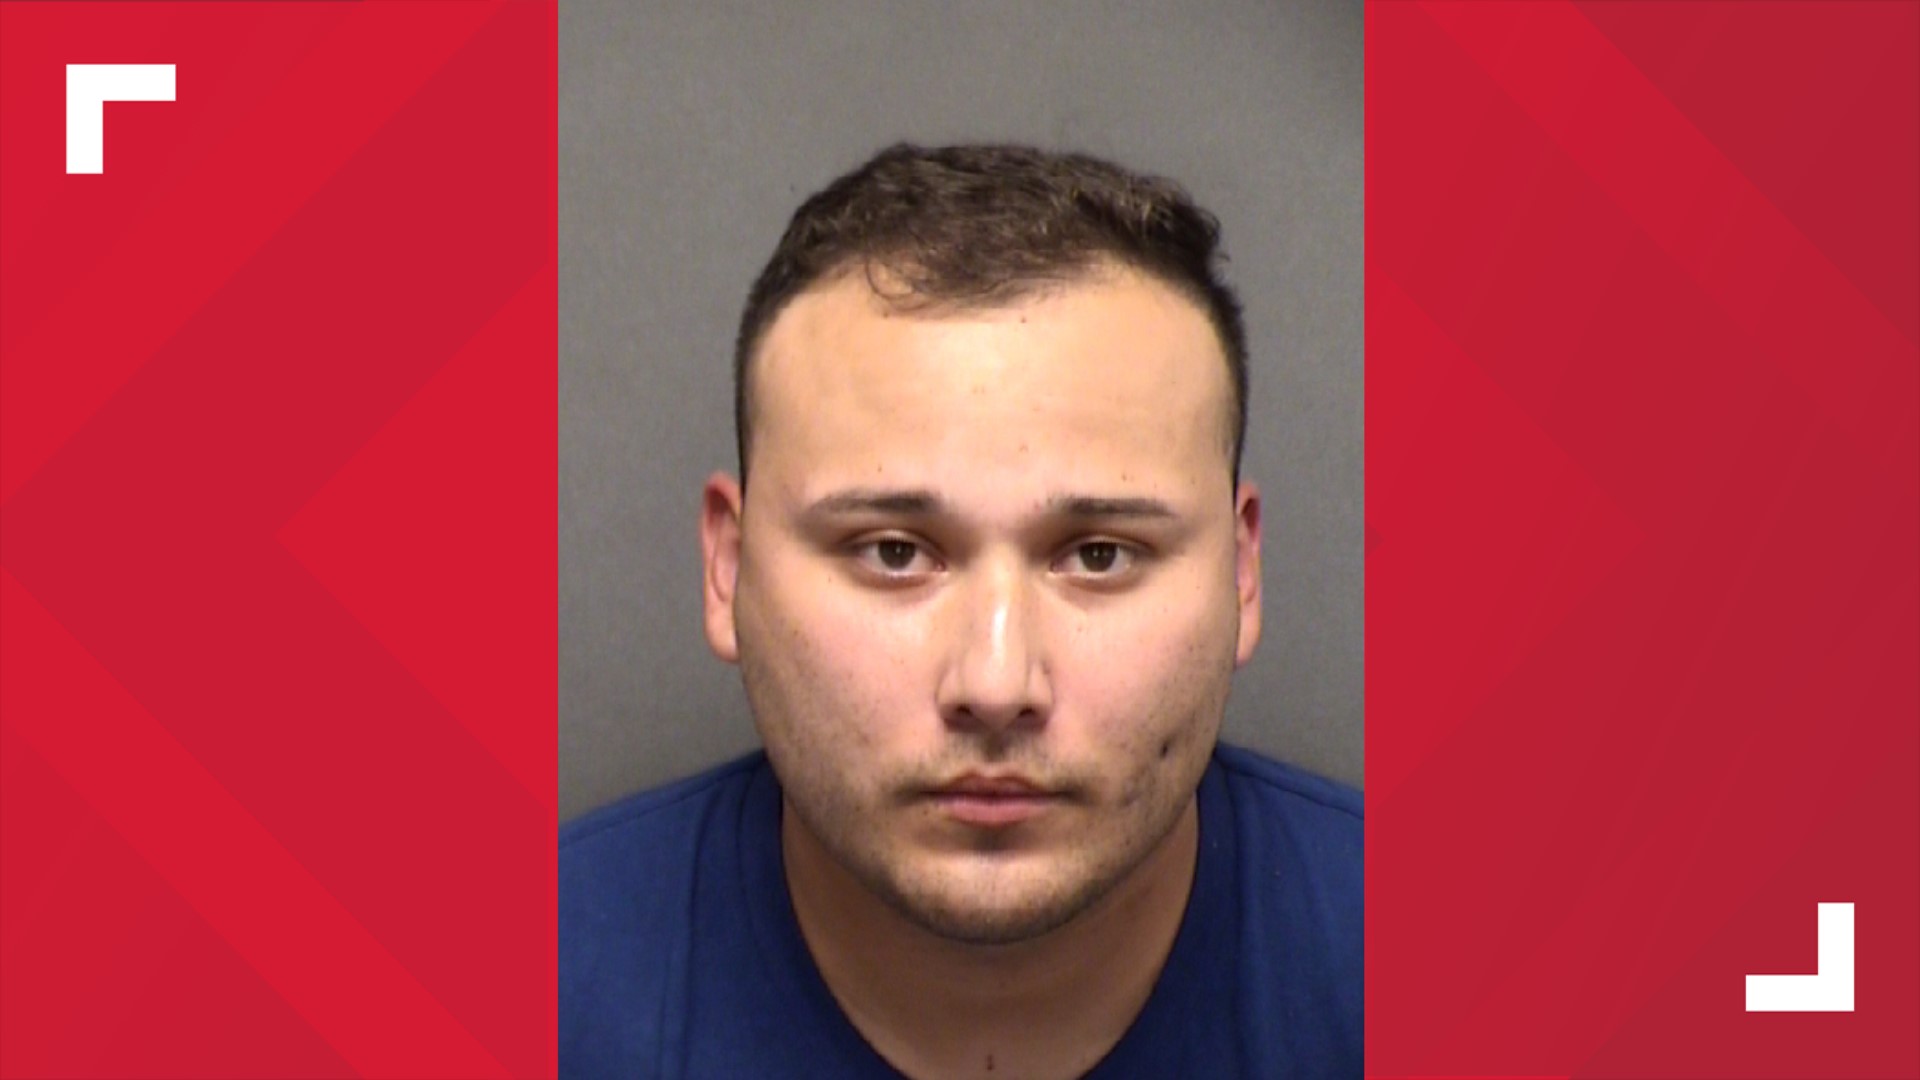 According to SAPD, Officer Rafael Hernandez III was seen traveling 100 mph and swerving onto the shoulder.